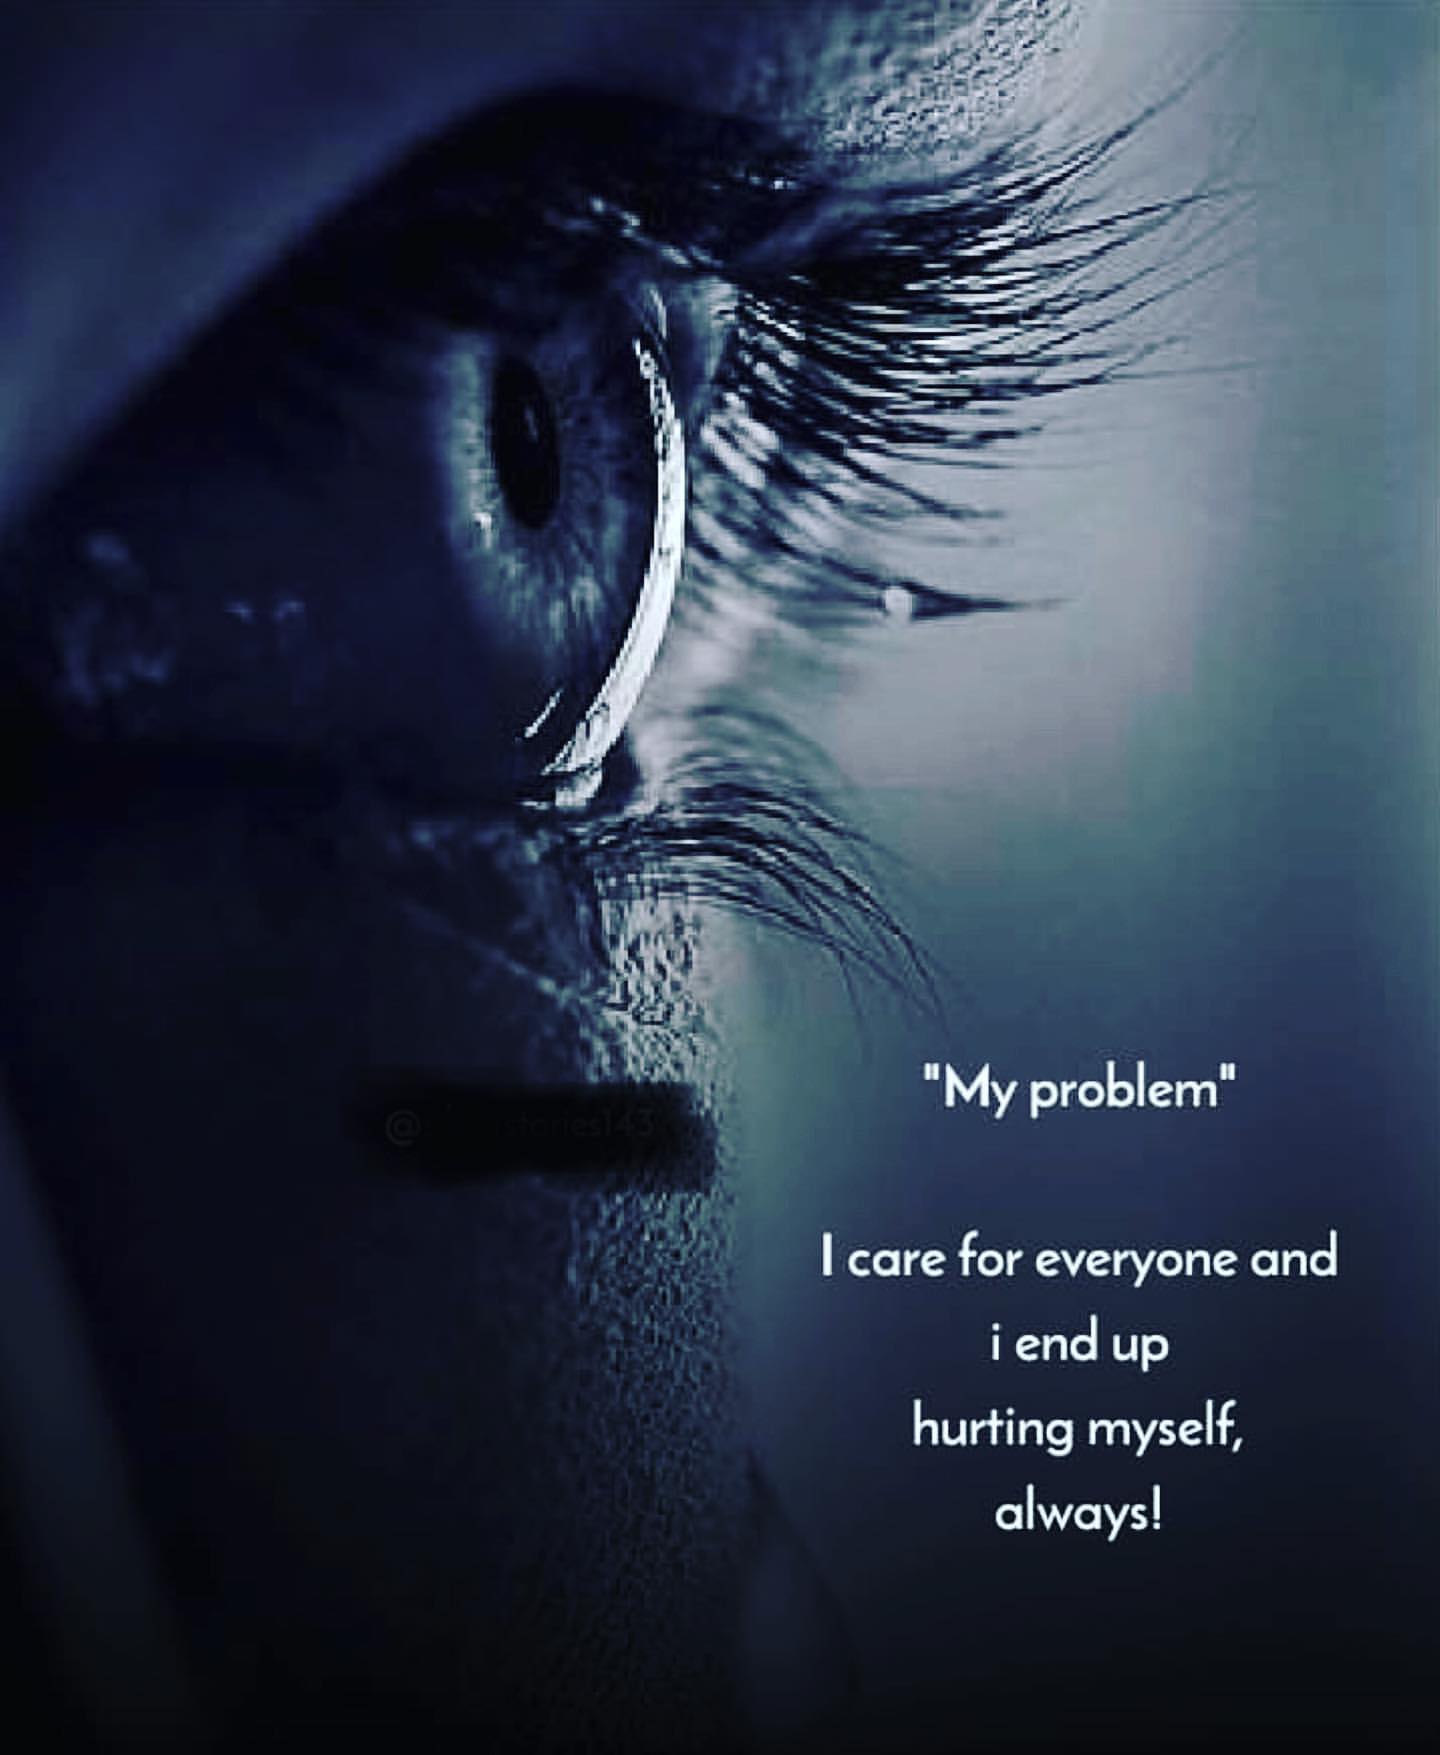 "My problem" I care for everyone and I end up hurting myself, always!